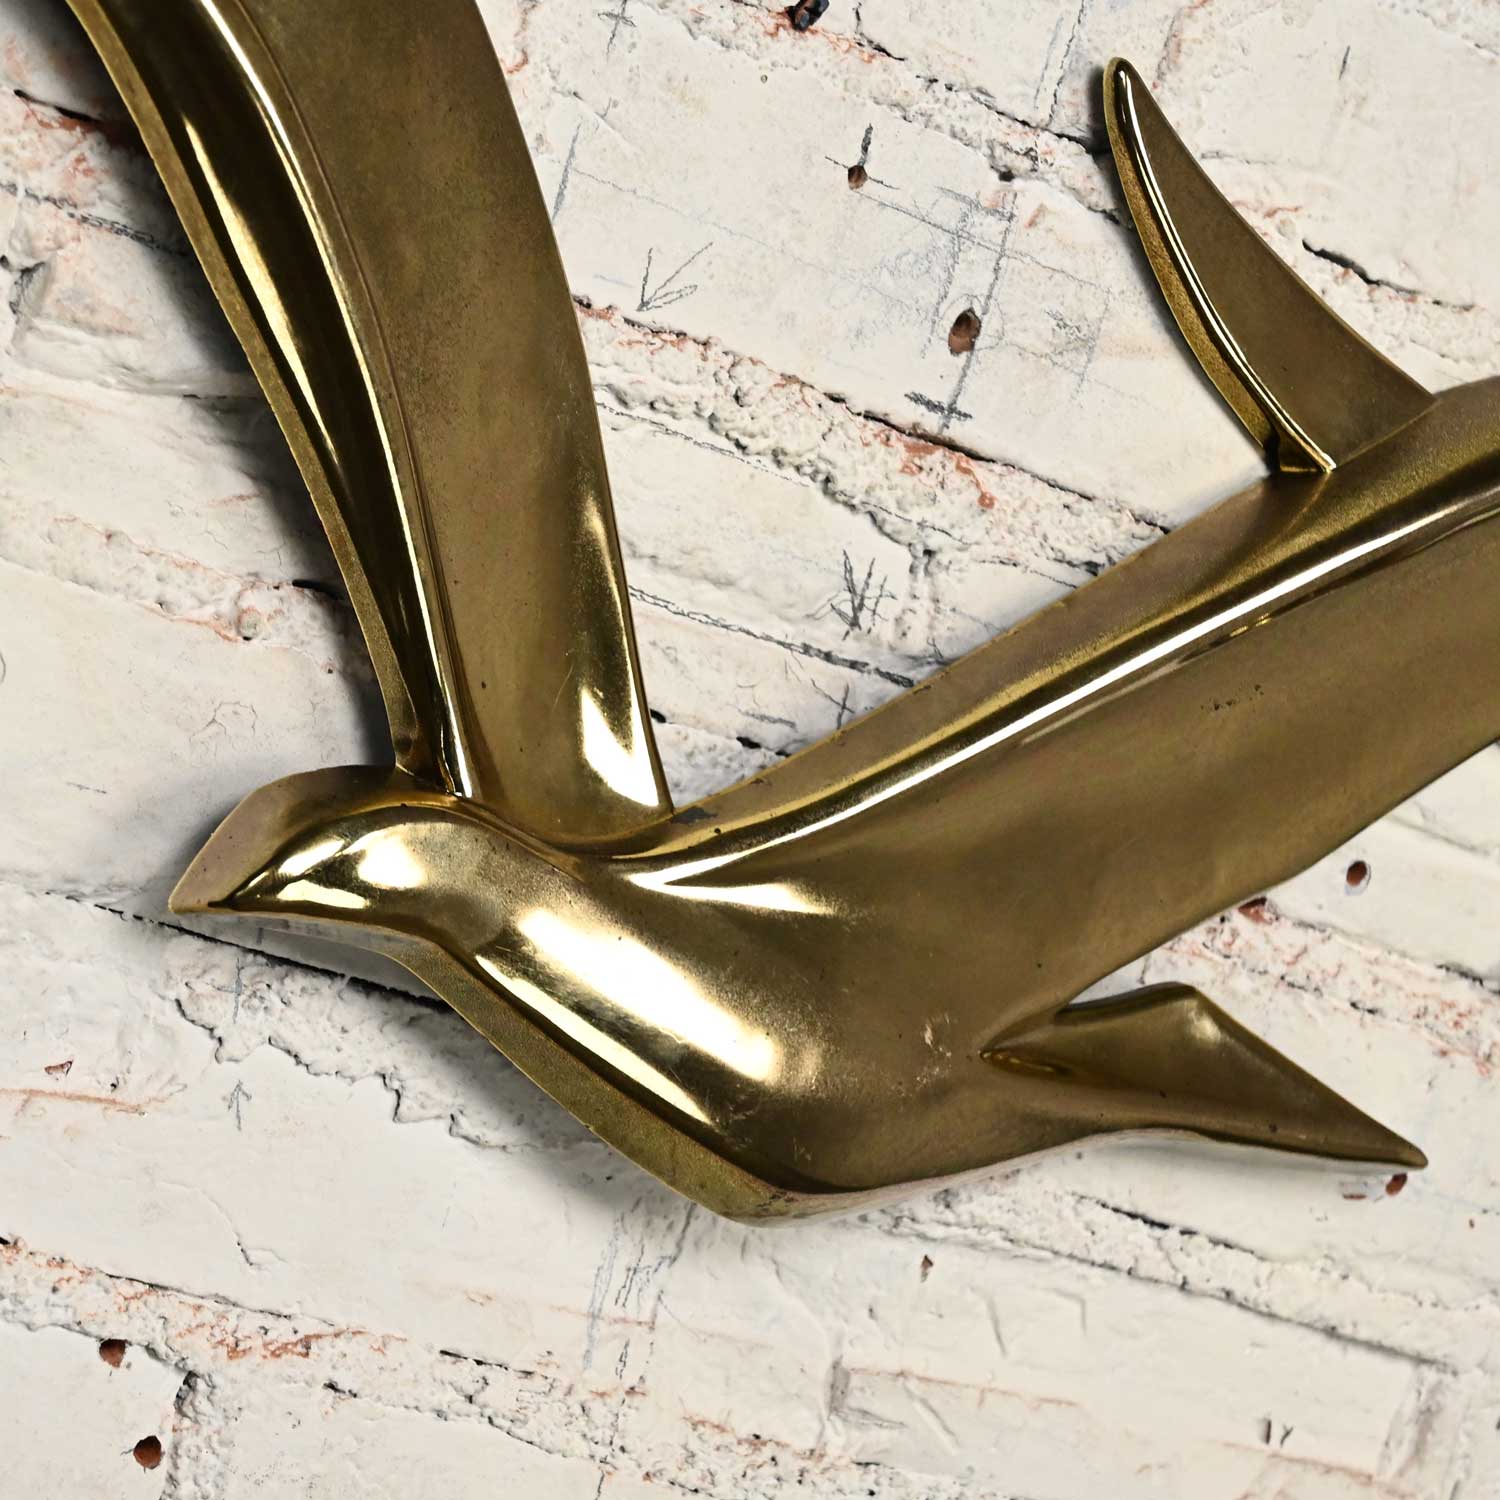 Vintage Mid-Century Modern Gilded Plastic Seagulls in Flight Birds 2 Piece Wall Sculpture by Syroco